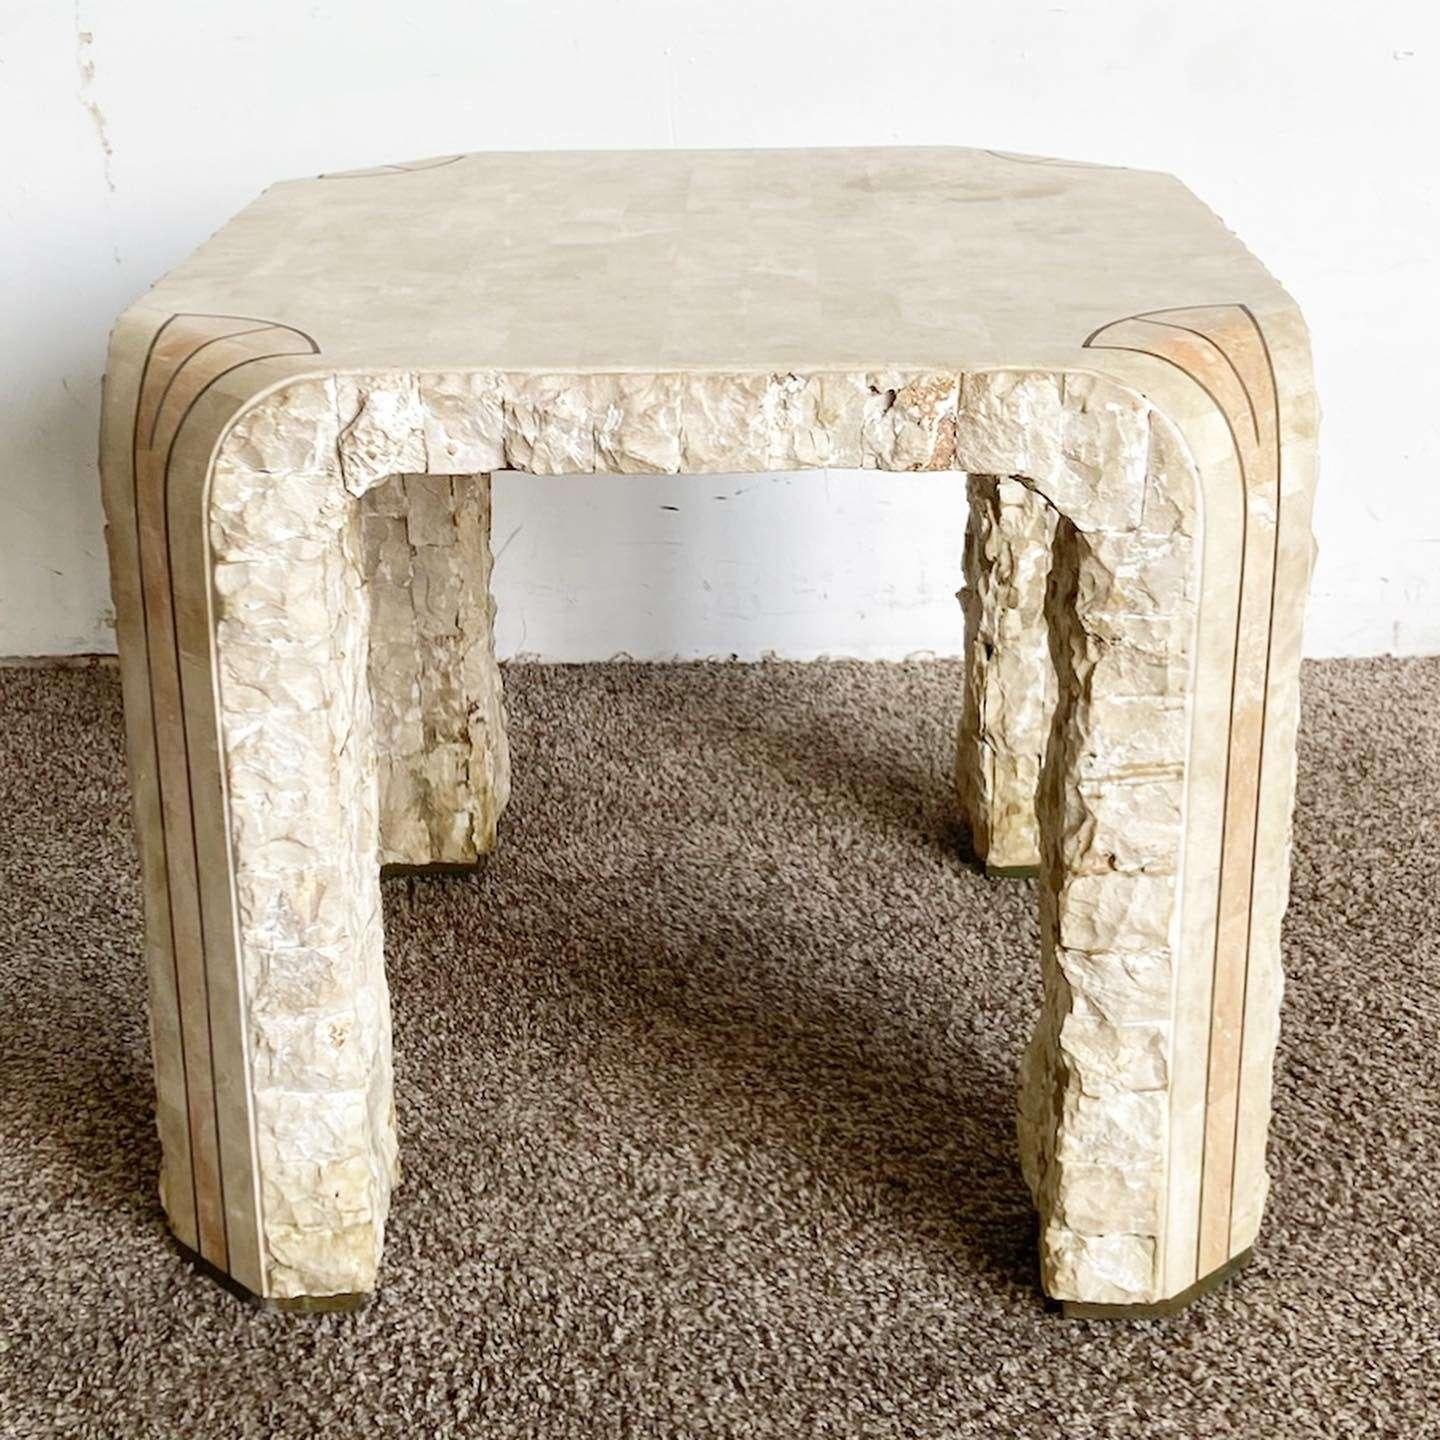 Add a touch of vintage postmodern charm to your space with this wonderful tessellated stone side table. The table features brass inlays on the feet and bordering the pink and beige stone, creating a stylish and unique design.

Vintage postmodern